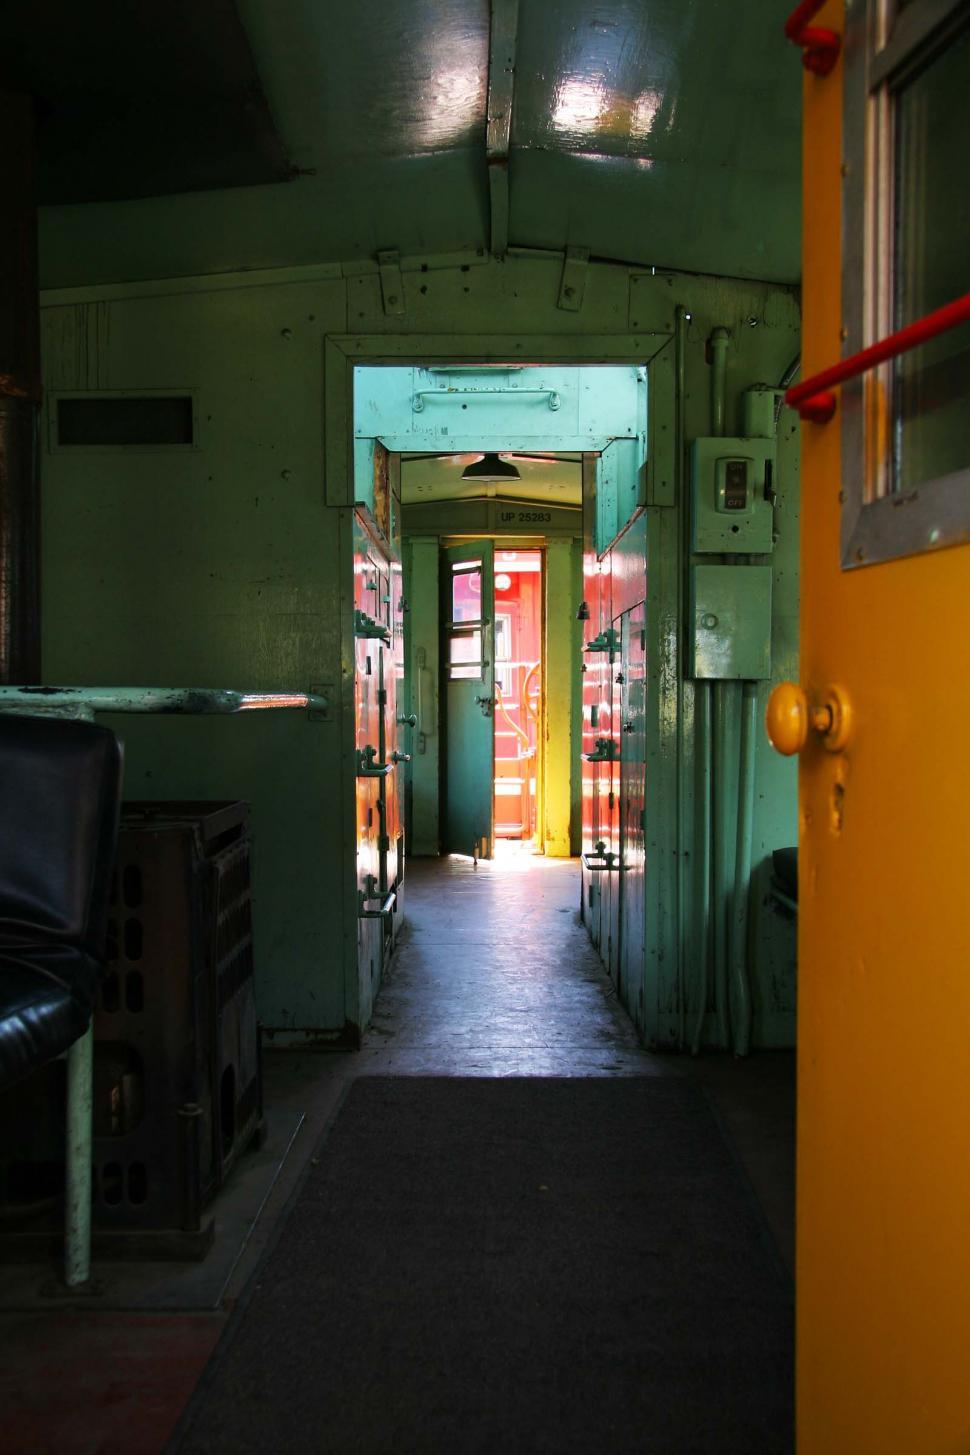 Free Image of A Hallway With a Yellow Door and a Black Chair 